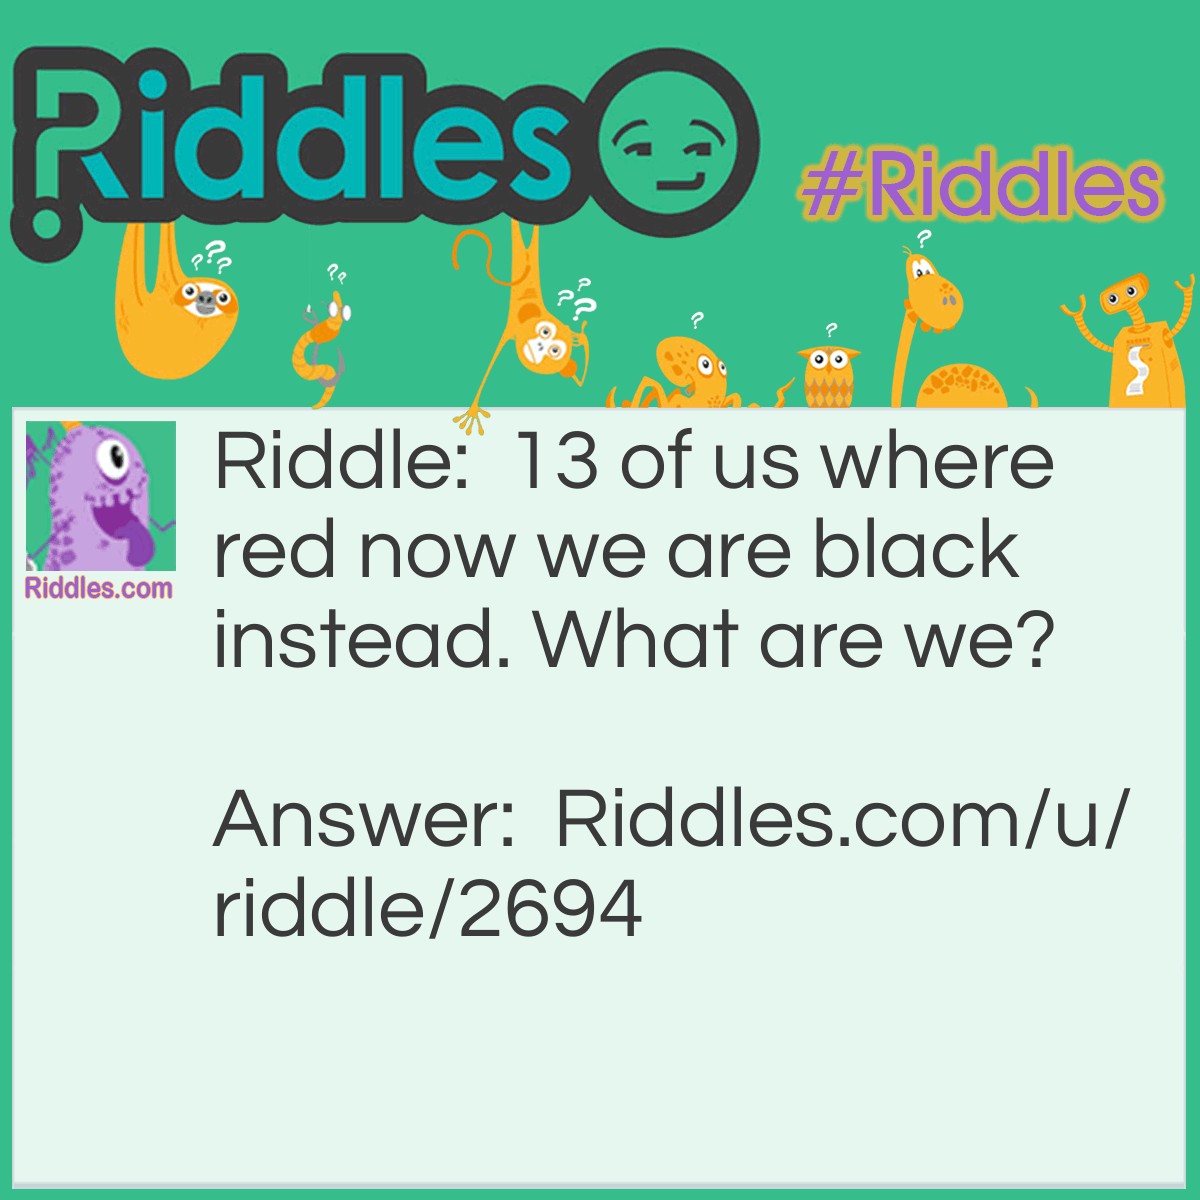 Riddle: 13 of us where red now we are black instead. What are we? Answer: A match and 13=M.